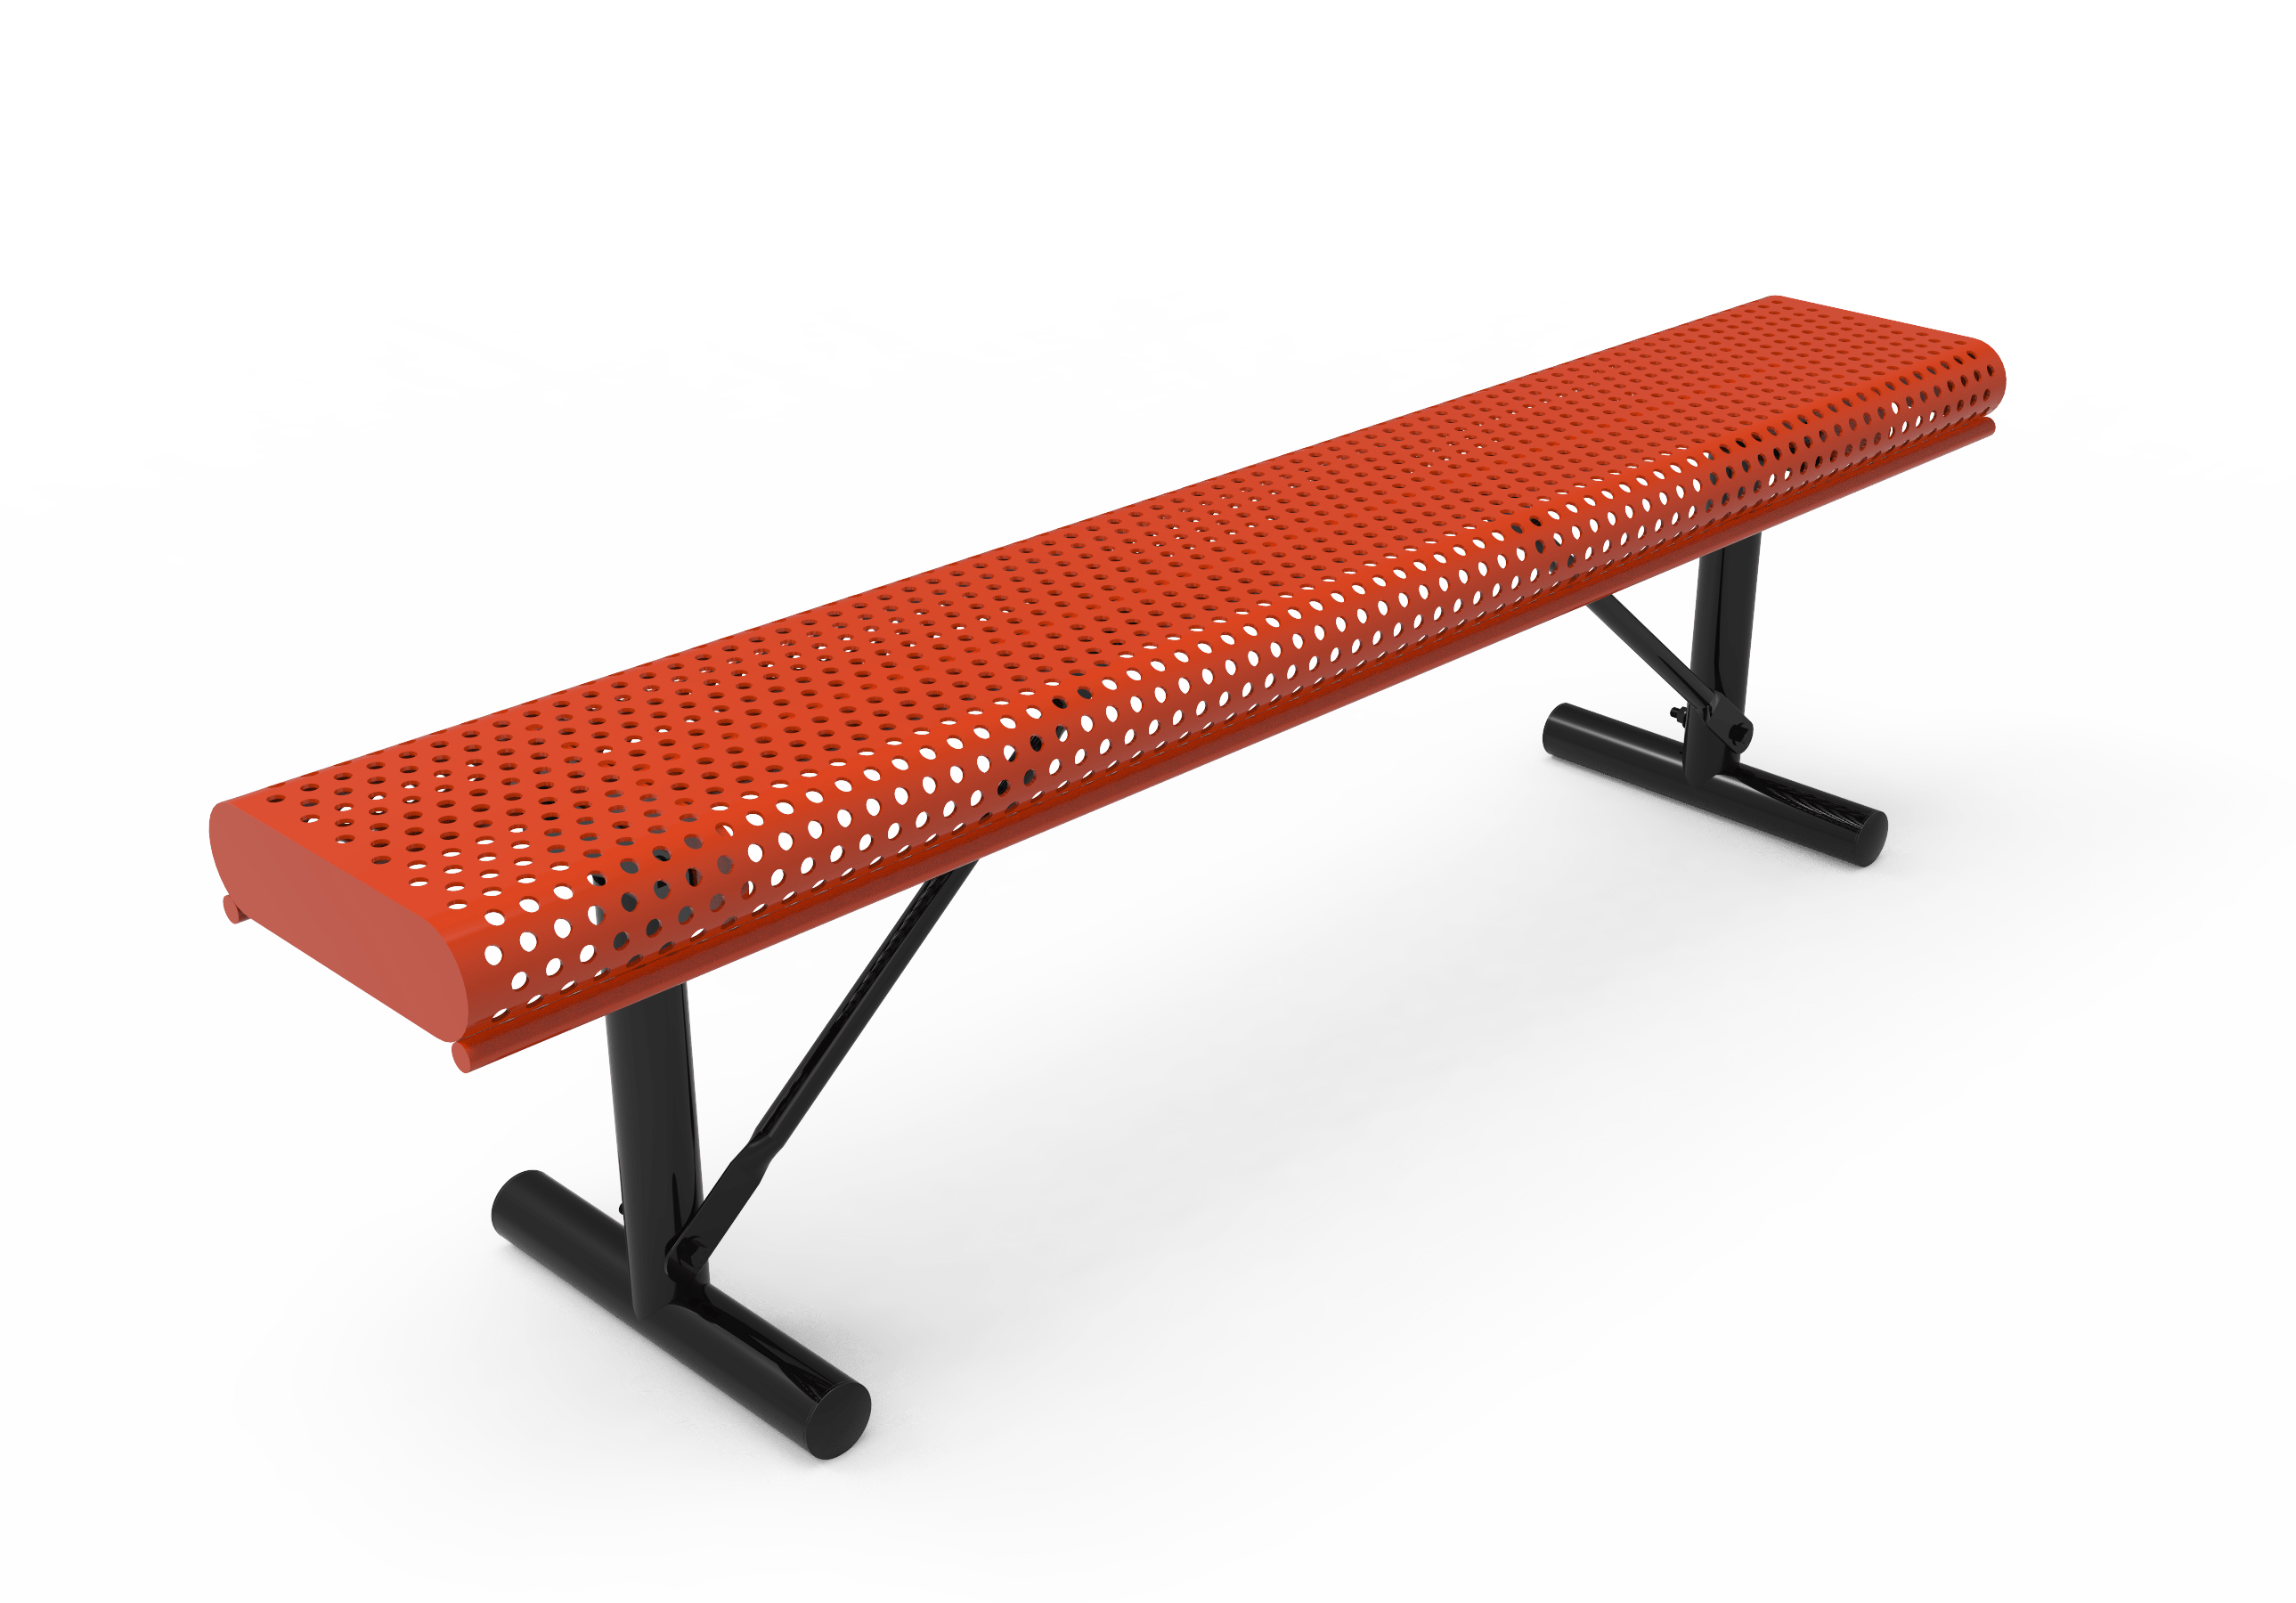 4′ Rolled Bench Without Back-Punched
BRE04-D-21-000
Industry Standard Finish
$519.00
BRE04-B-21-000
Advantage Premium Finish
$629.00
